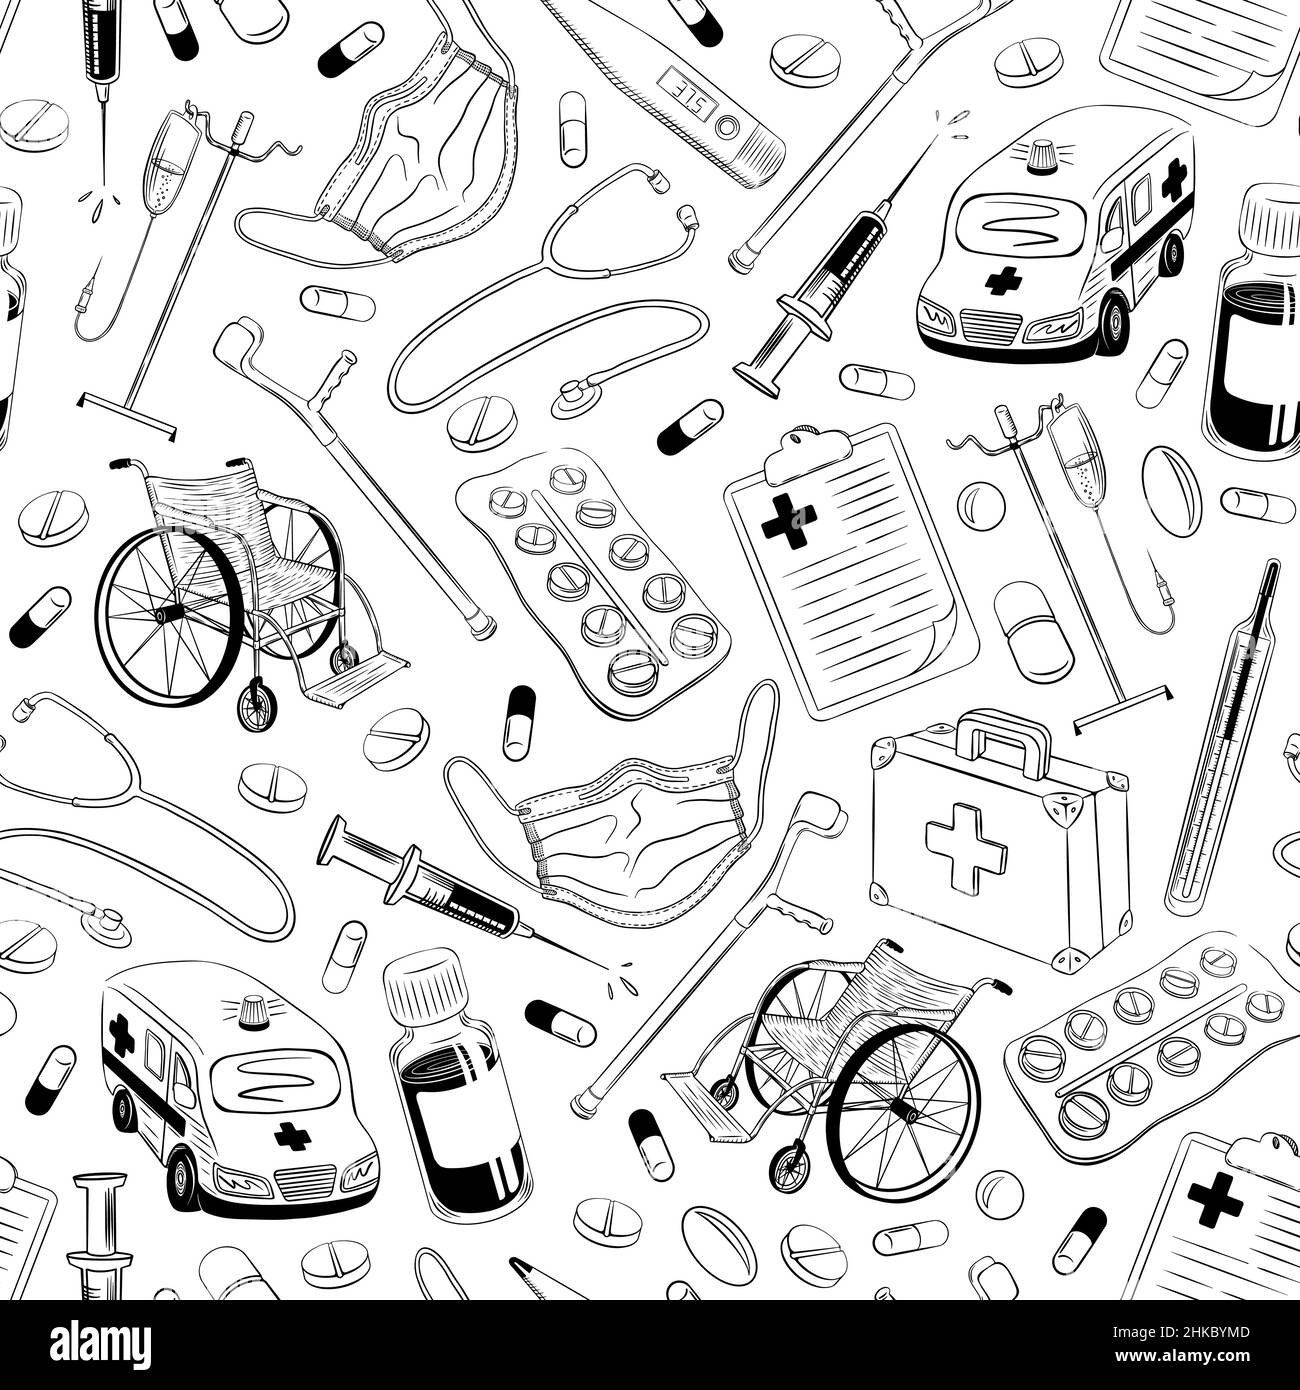 Medical seamless pattern. Hand drawn clinic stuff in sketchy vintage style on white background. Vector illustration. Stock Vector